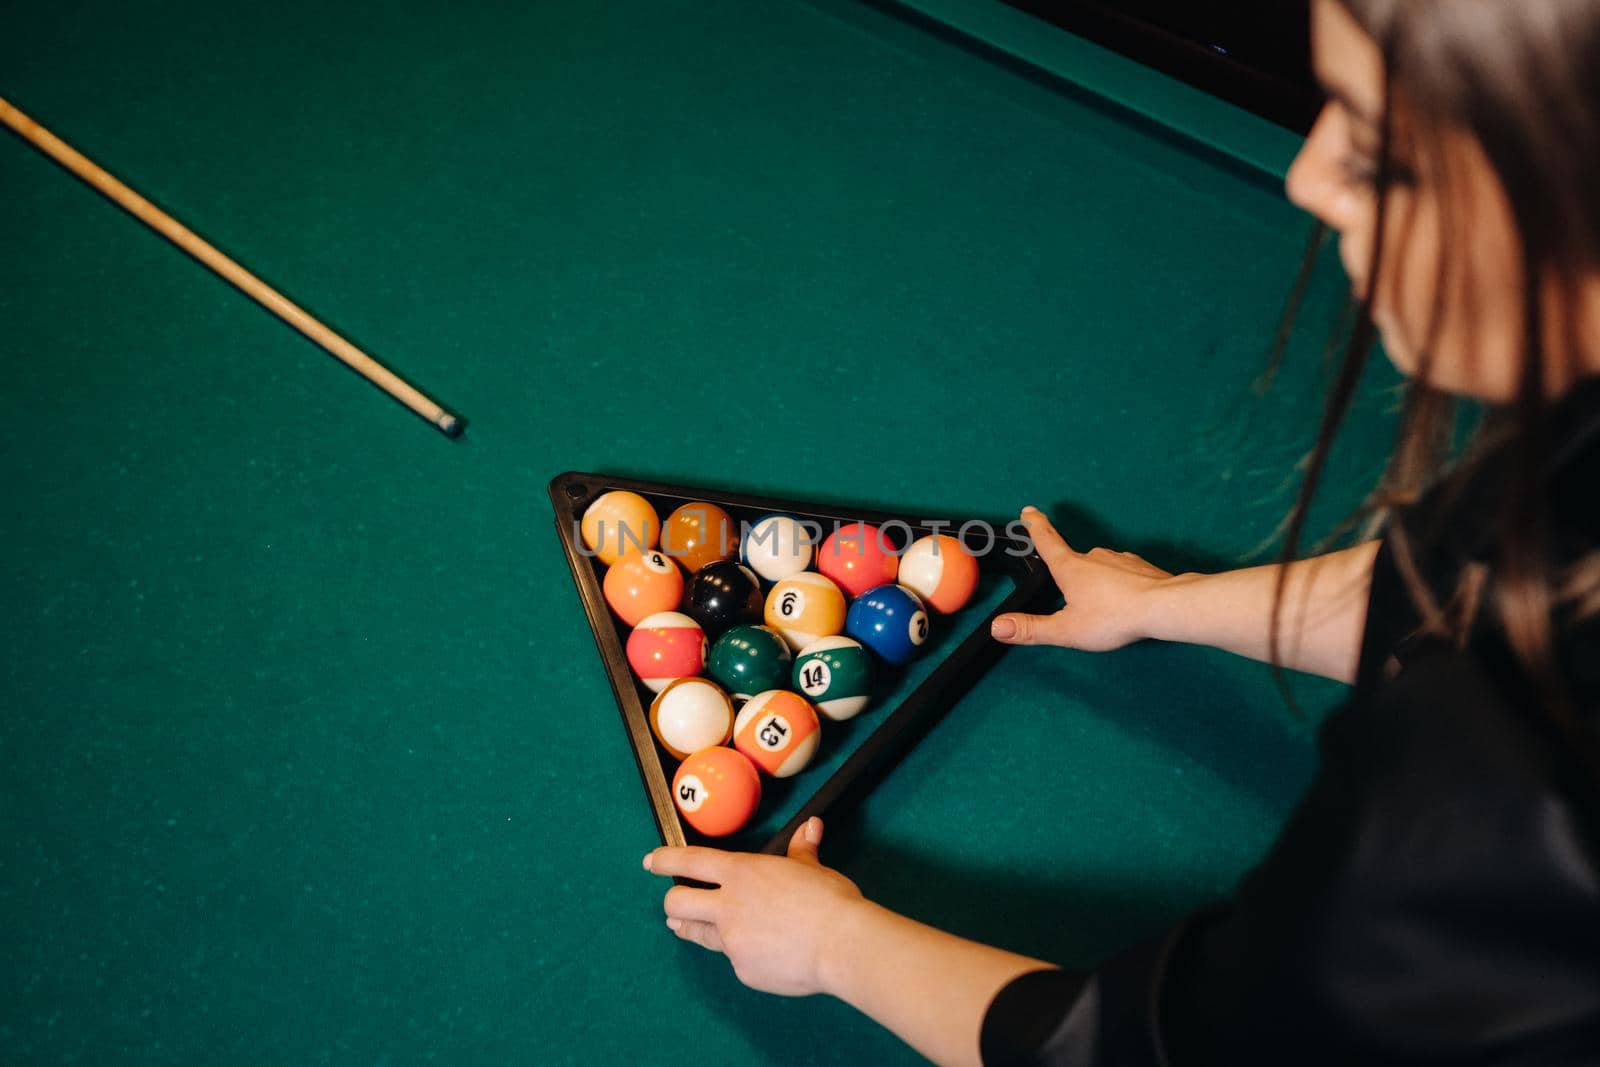 The girl puts out billiard balls to start the game in the billiard club .Playing pool.